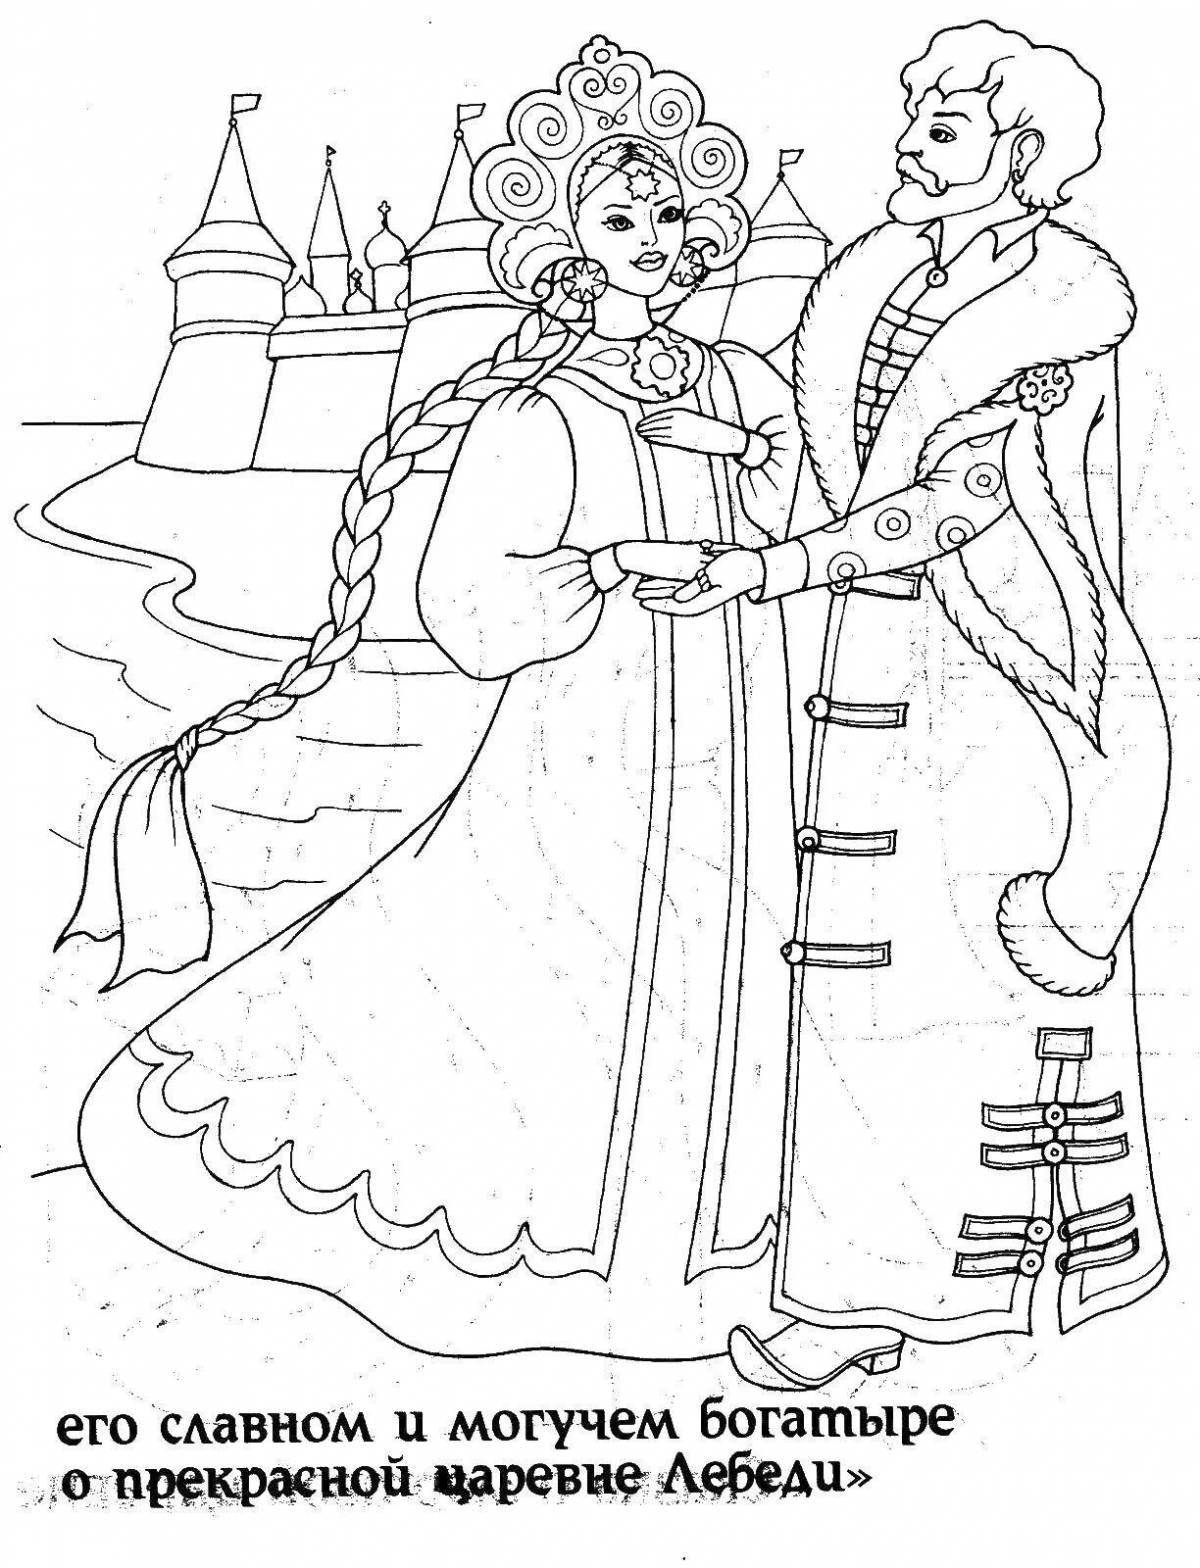 Great coloring book based on Pushkin's works